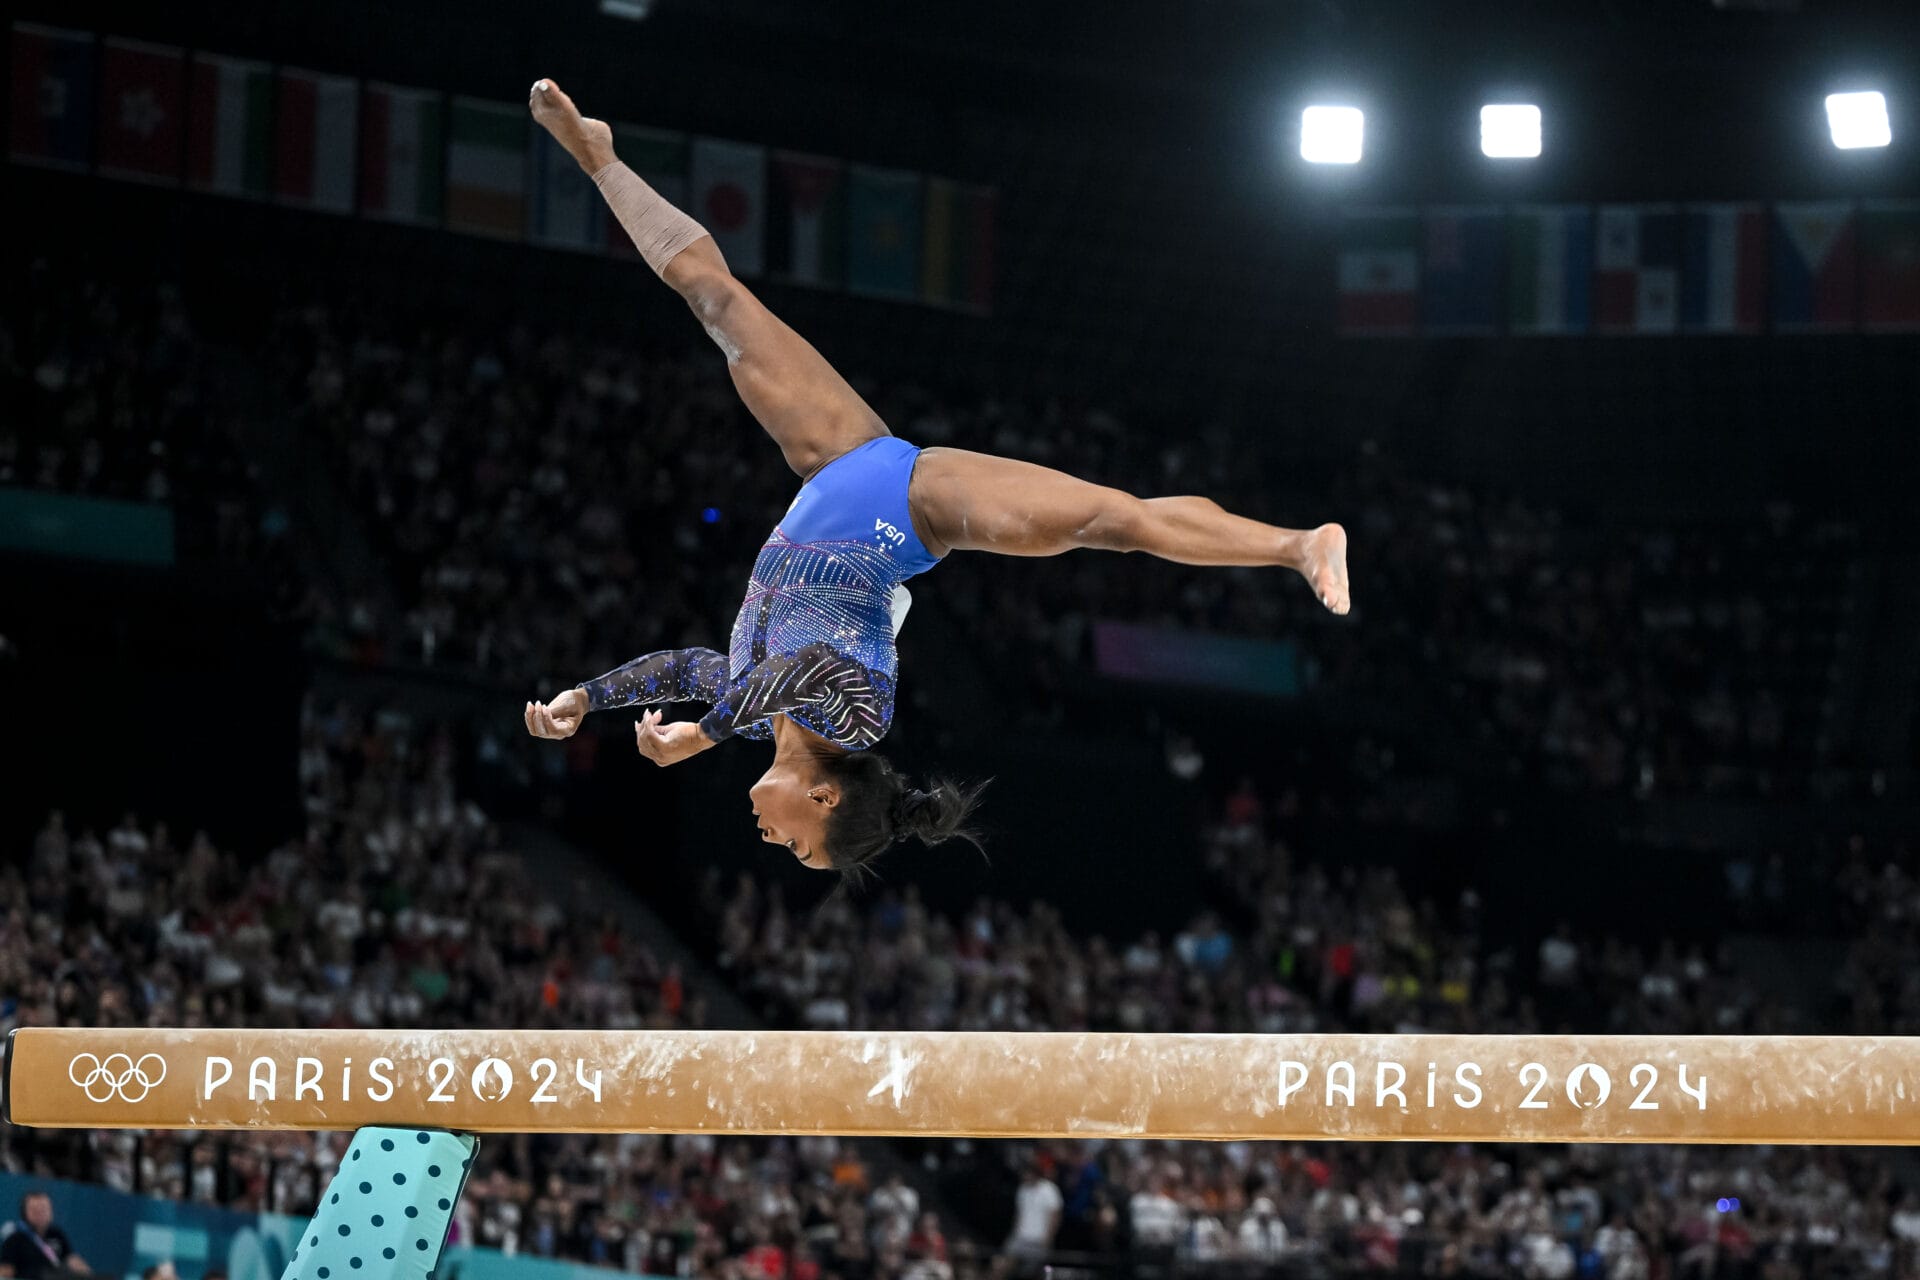 Simone Biles of USA competes during the women's Artistic Gymnastics All-Around Final - on Balance Beam on Day 6 of the Olympic Games Paris 2024 at Bercy Arena on August 1, 2024 in Paris, France. (Photo by Harry Langer/DeFodi Images via Getty Images)